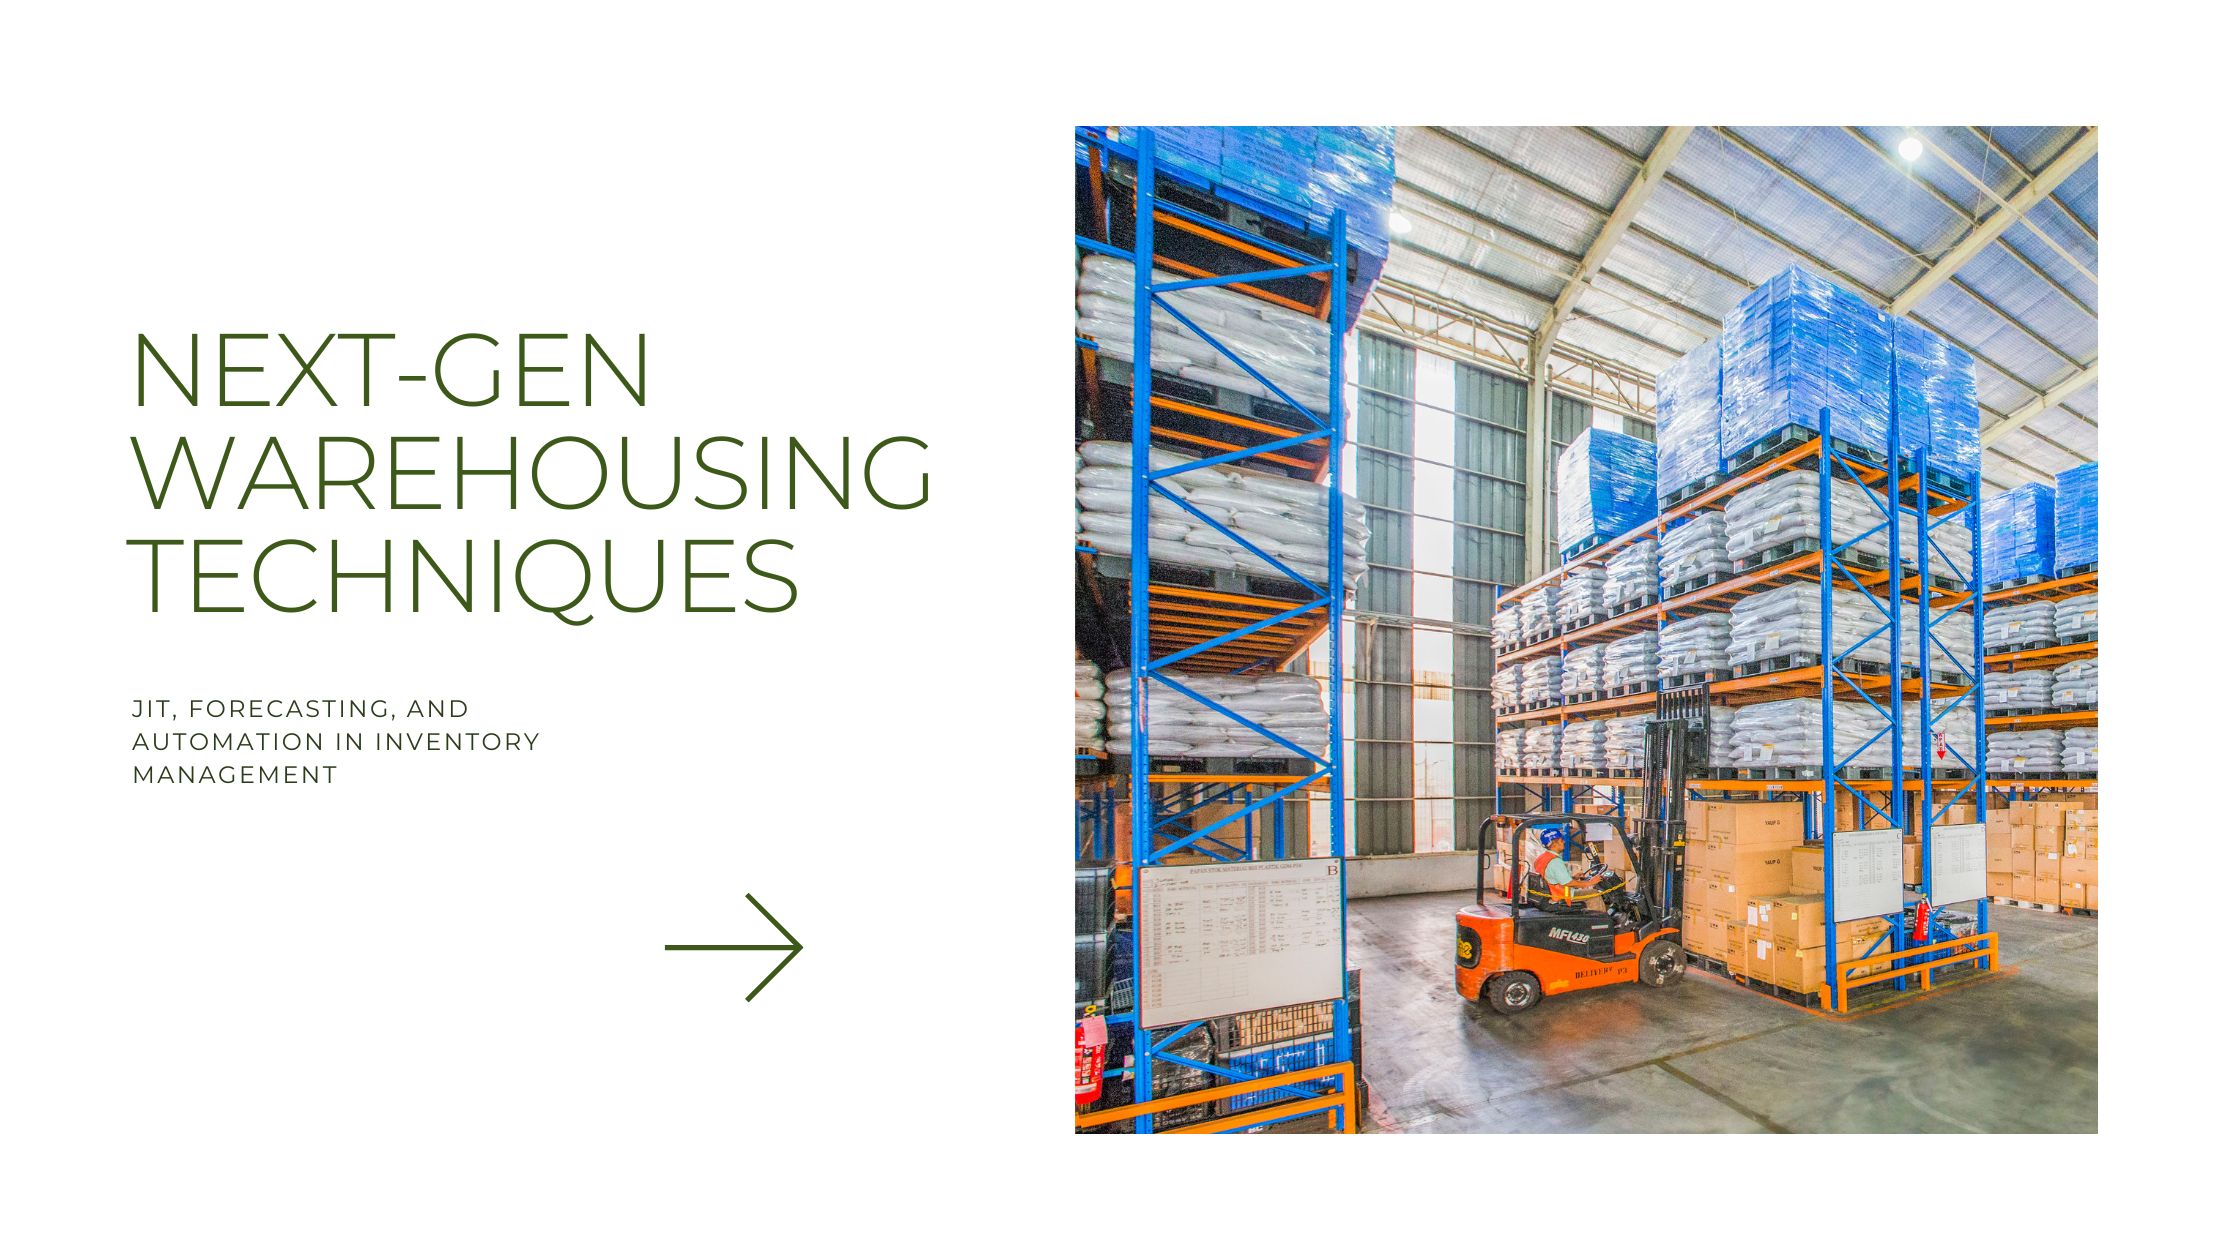 Next-Gen Warehousing Techniques Defining Inventory Control by vervo middle east for warehousing services in the UAE and globally